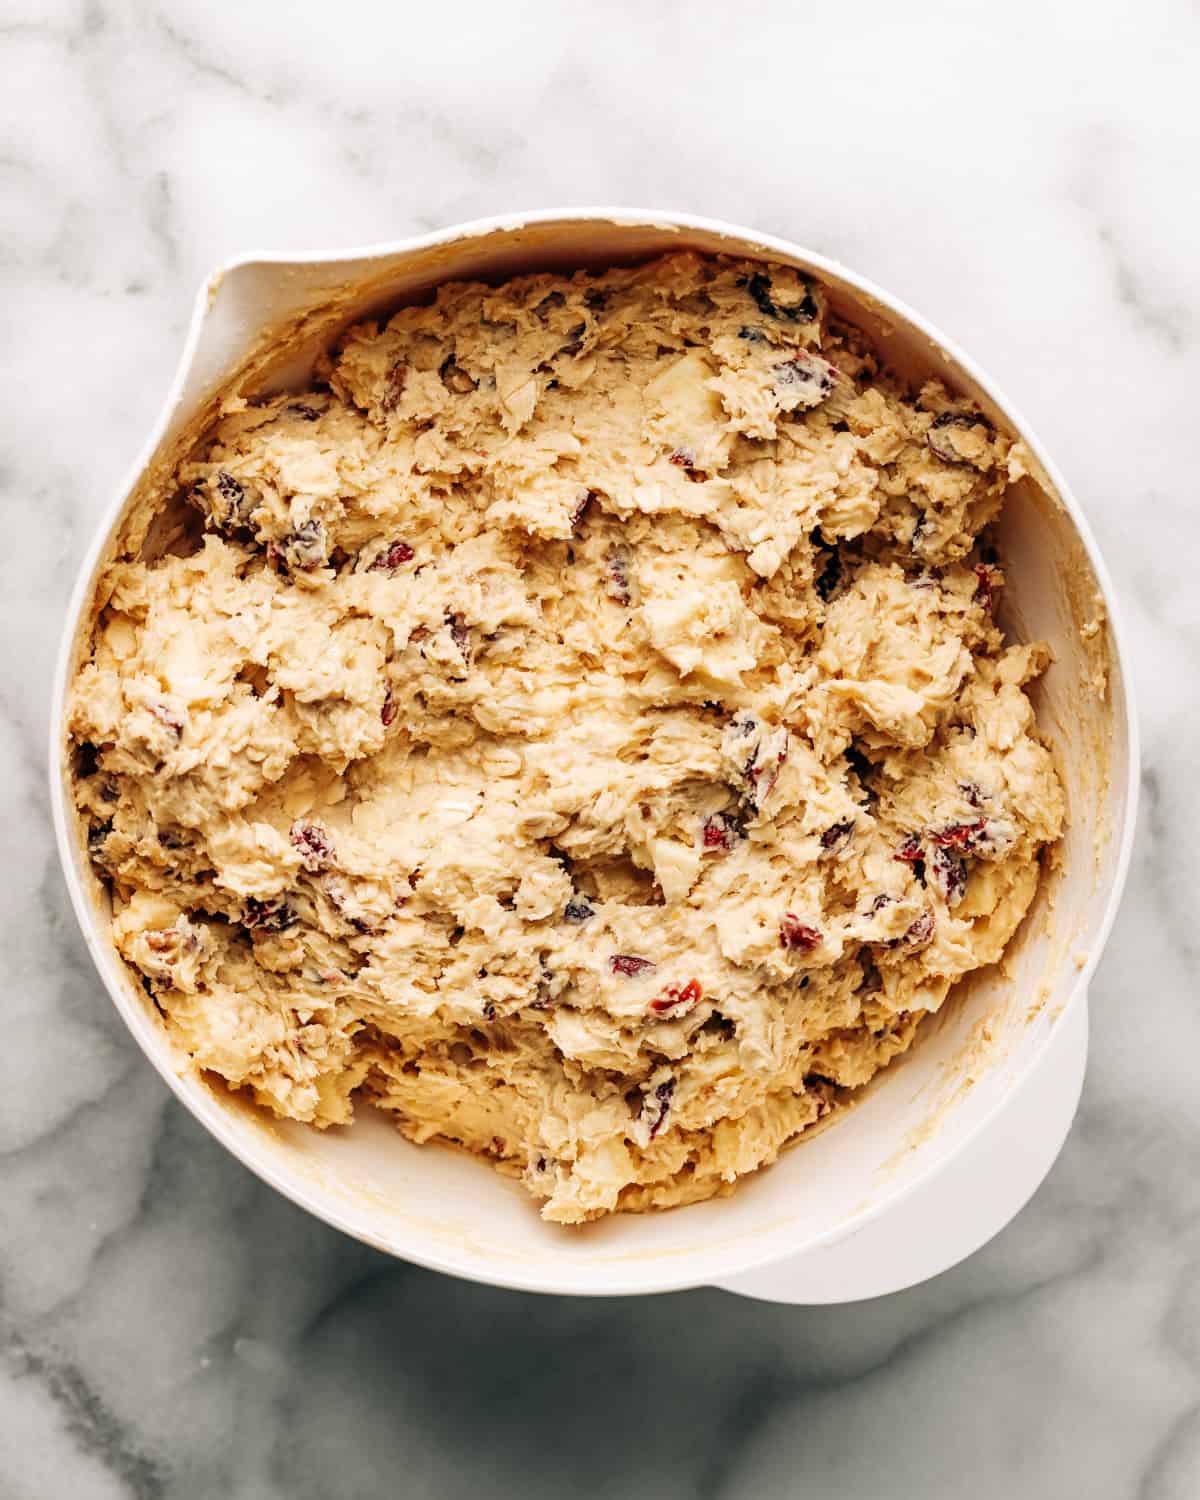  cranberry white chocolate chip cookie dough in a mixing bowl.